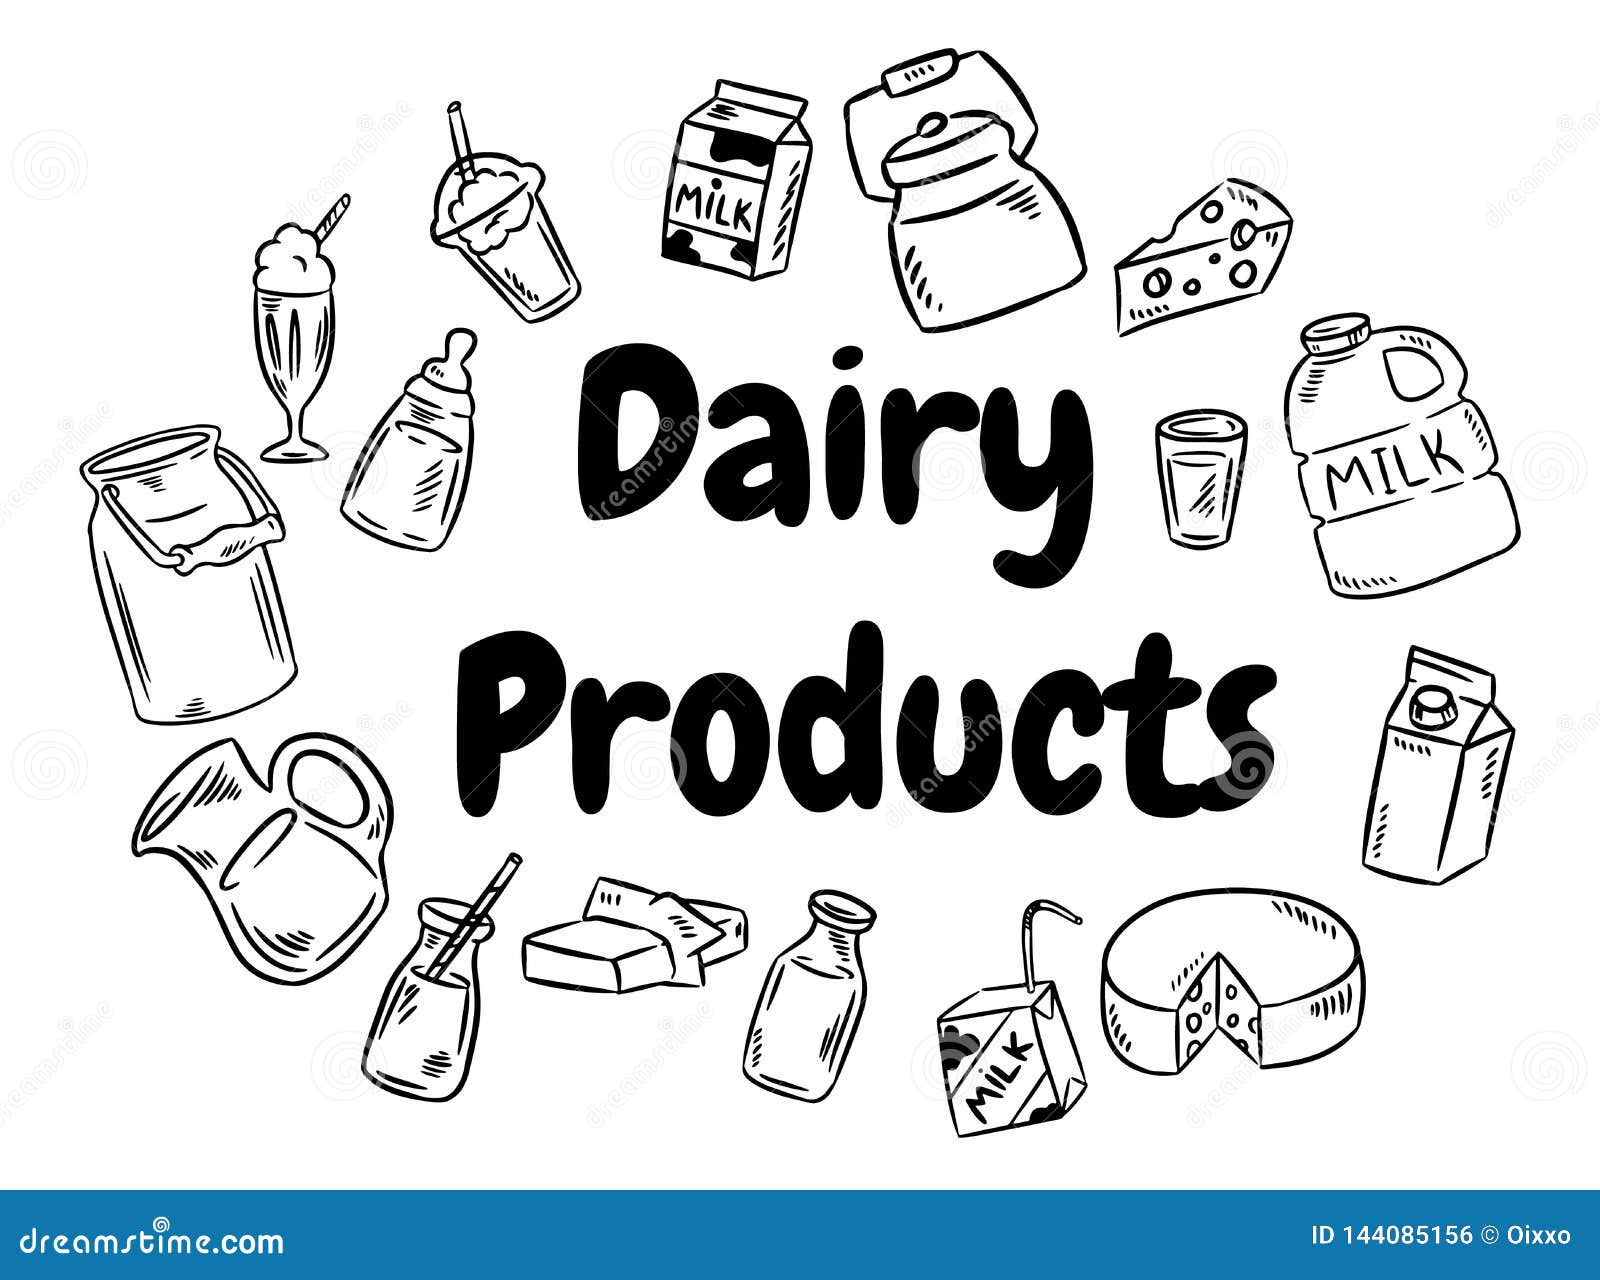 dairy products black and white doodles set.  illlustration